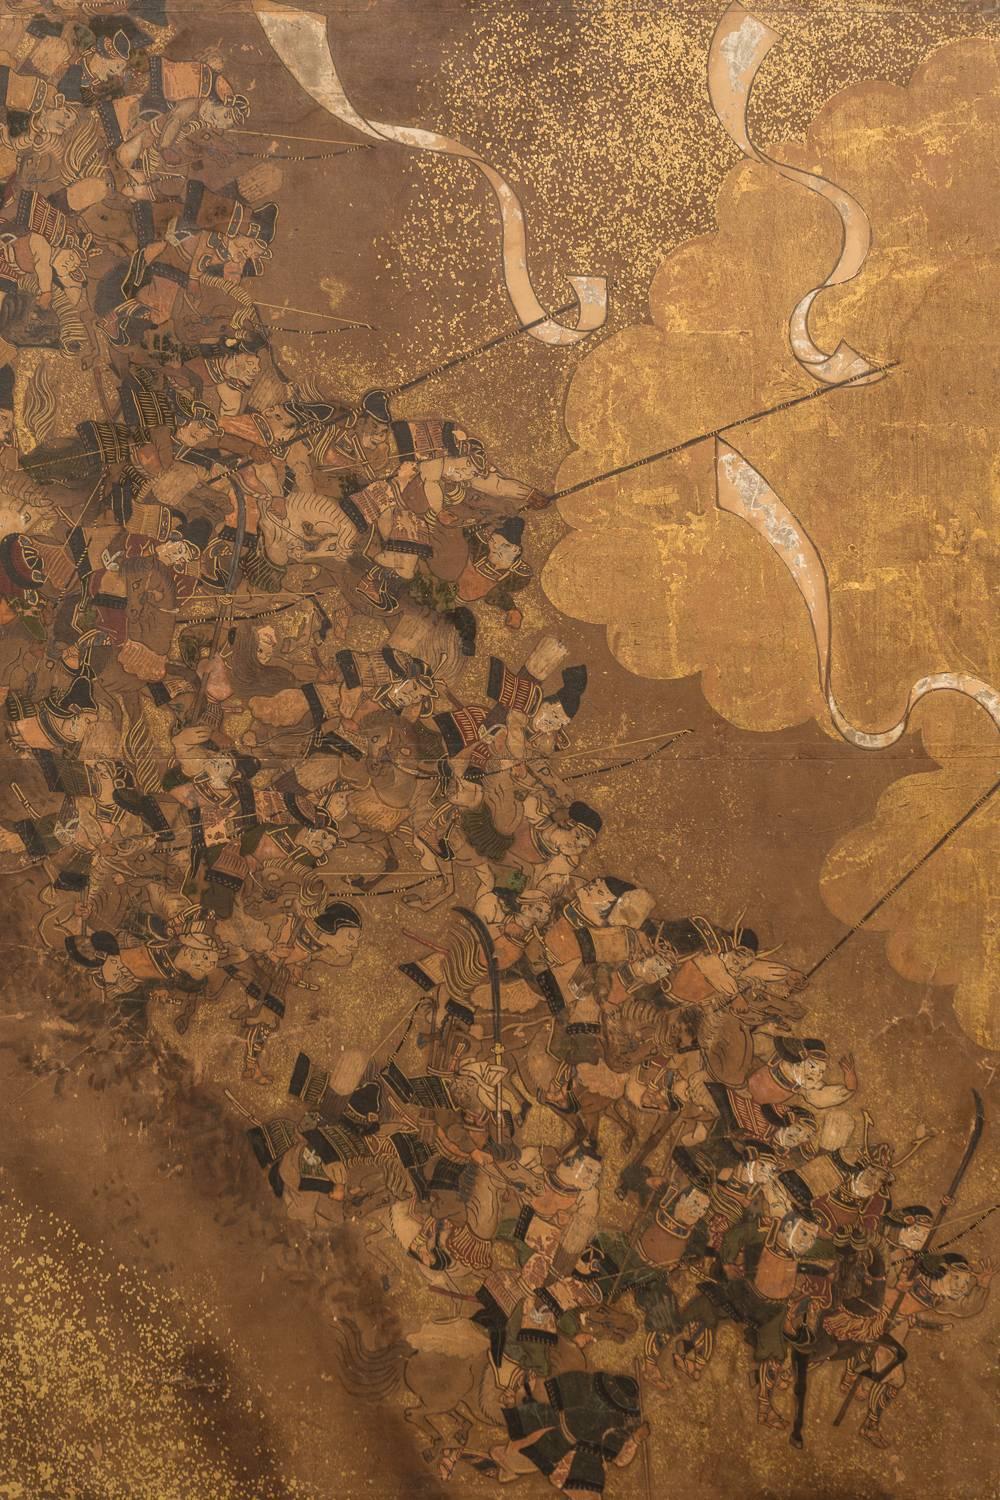 Tosa School painting depicting opposing samurai, Benkei and Yoshitsune, excellent detail, mineral pigments on gold leaf with gold dust.